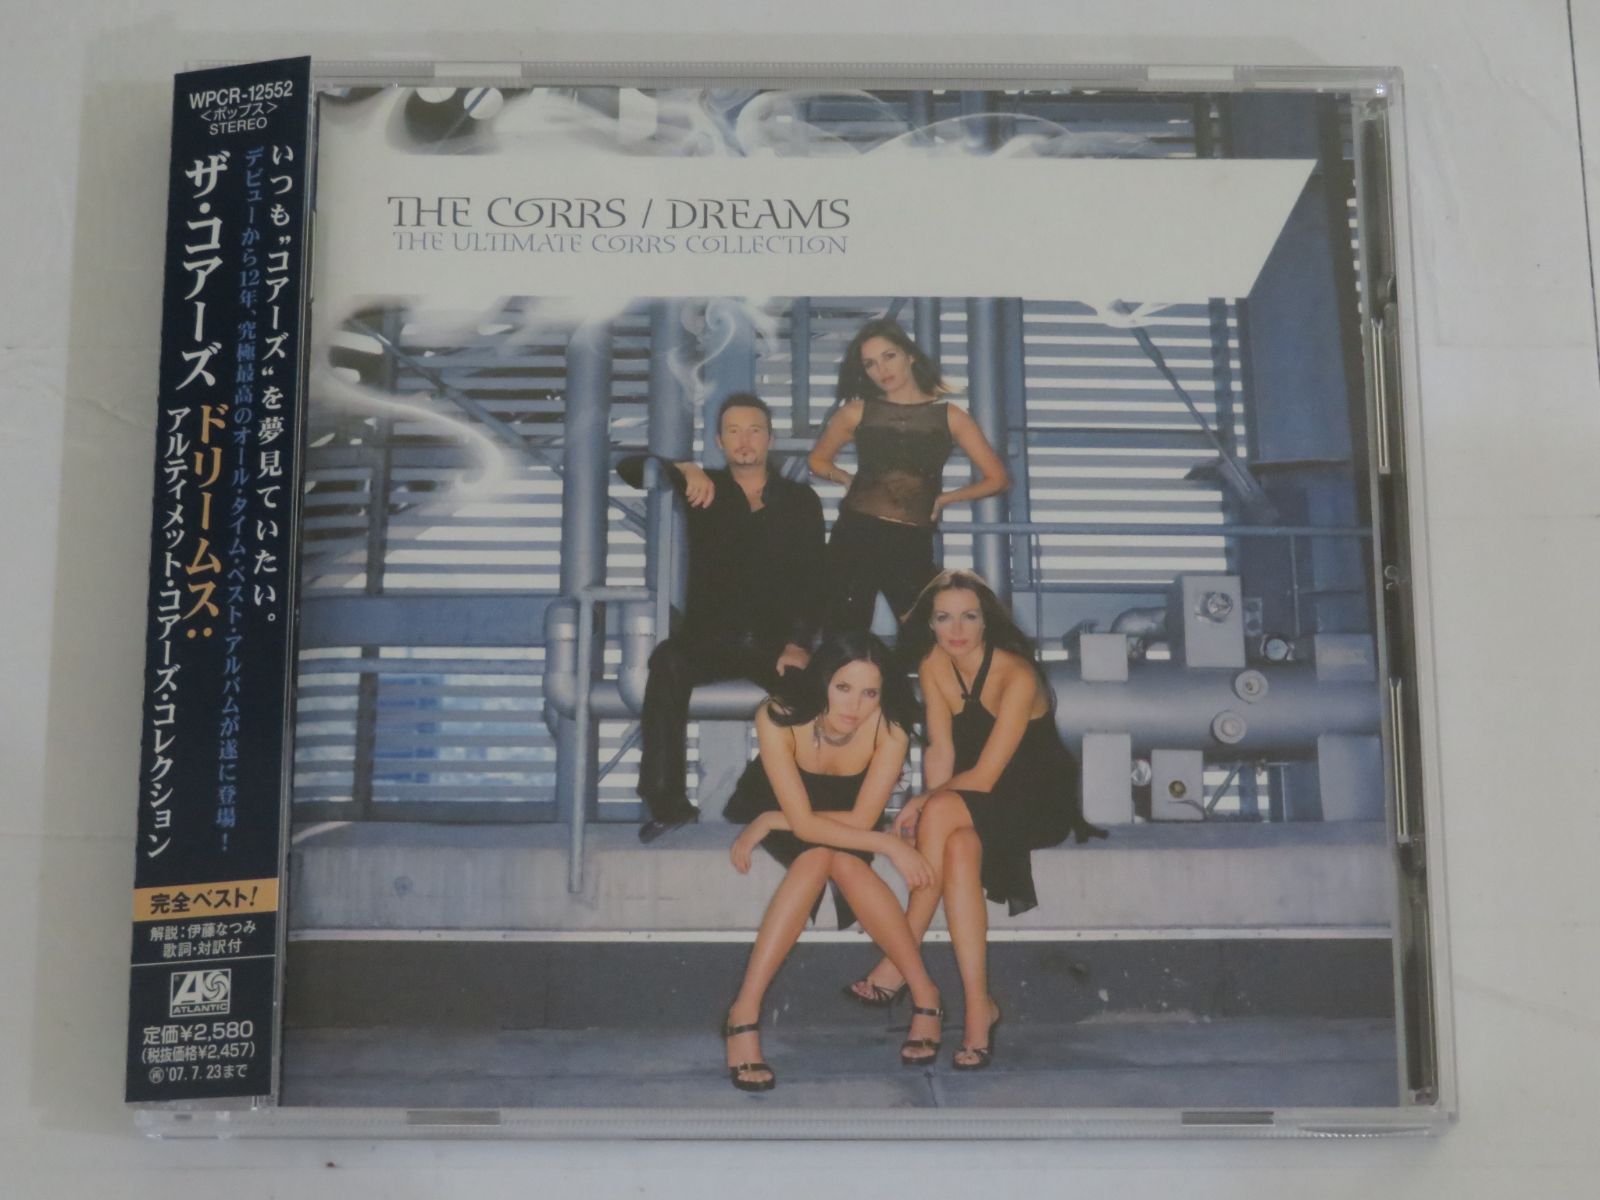 CD1枚 / ザ・コアーズ (THE CORRS) / Dreams - The Ultimate Corrs Collection  (2007年・WPCR-12552・フォークロック・ハウス・HOUSE) - メルカリ